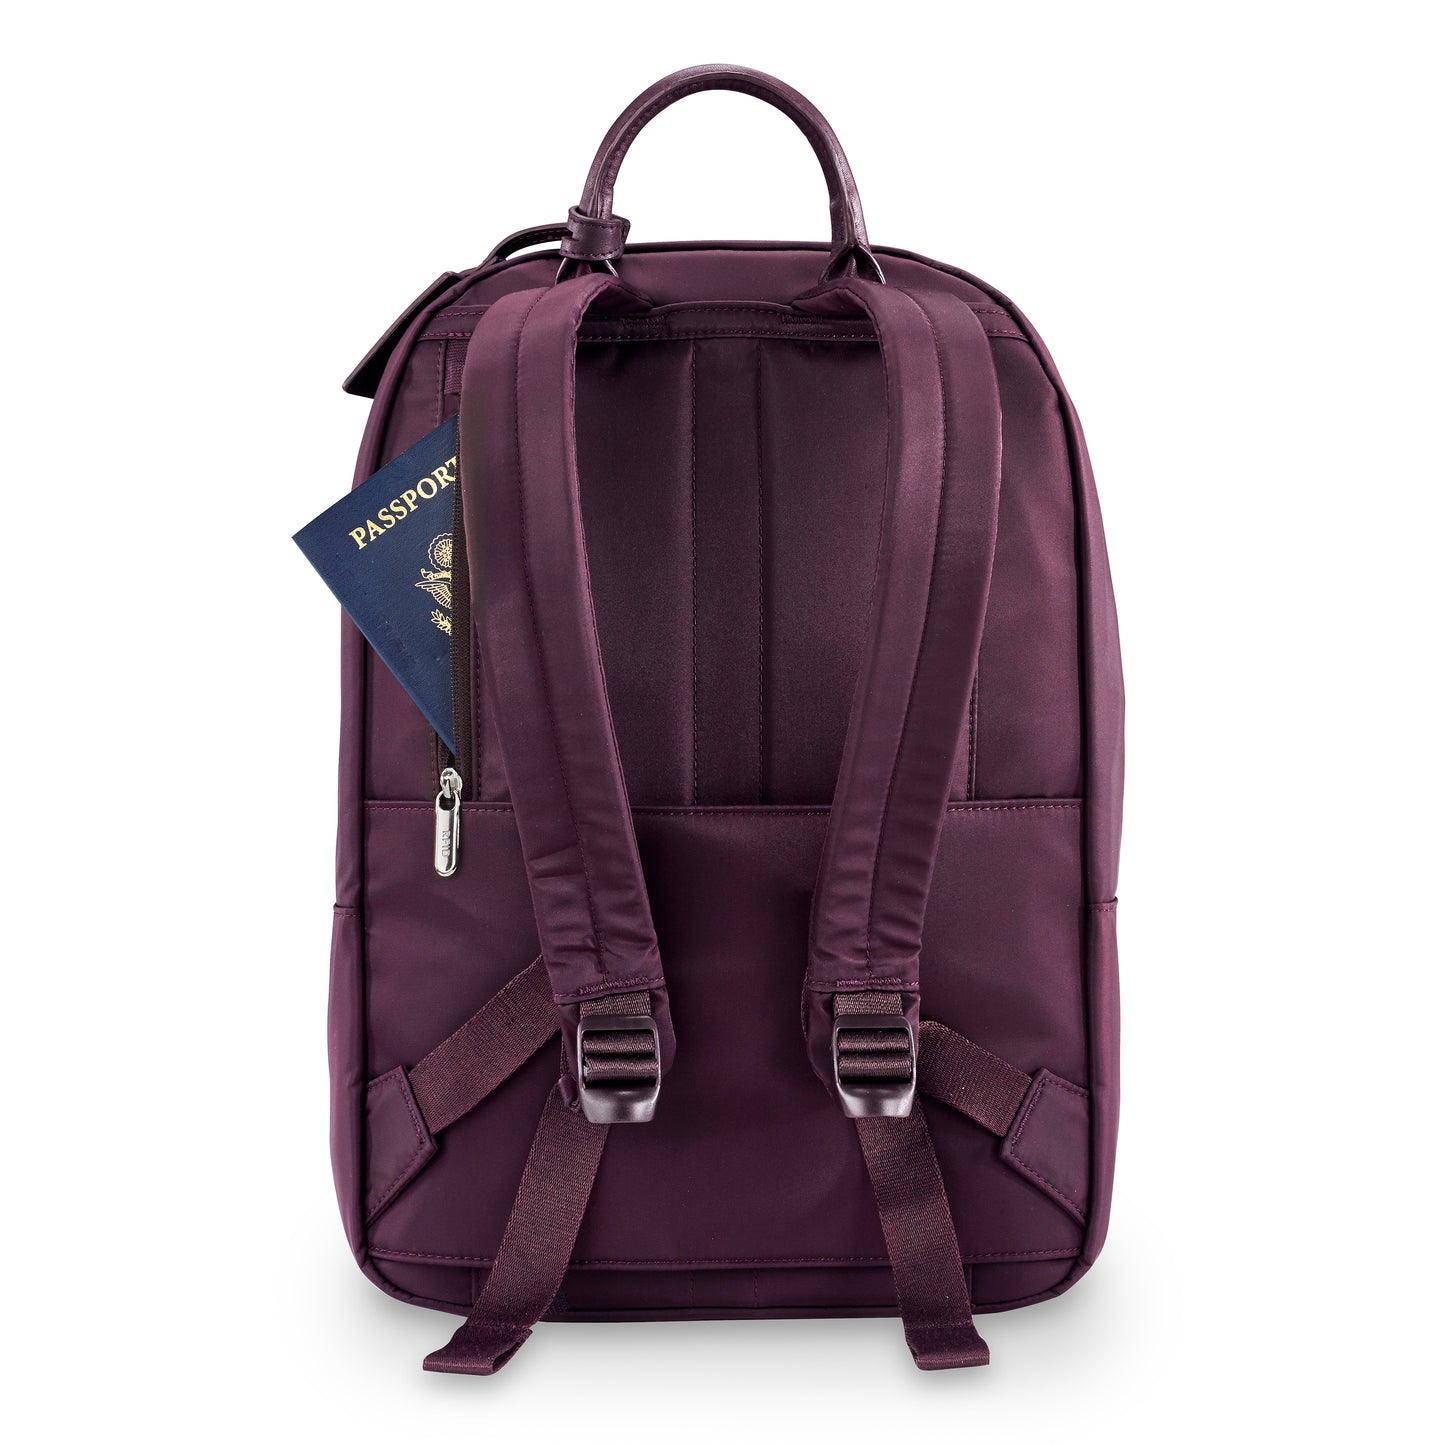 Briggs & Riley Rhapsody Collection Essential Backpack With Laptop Storage